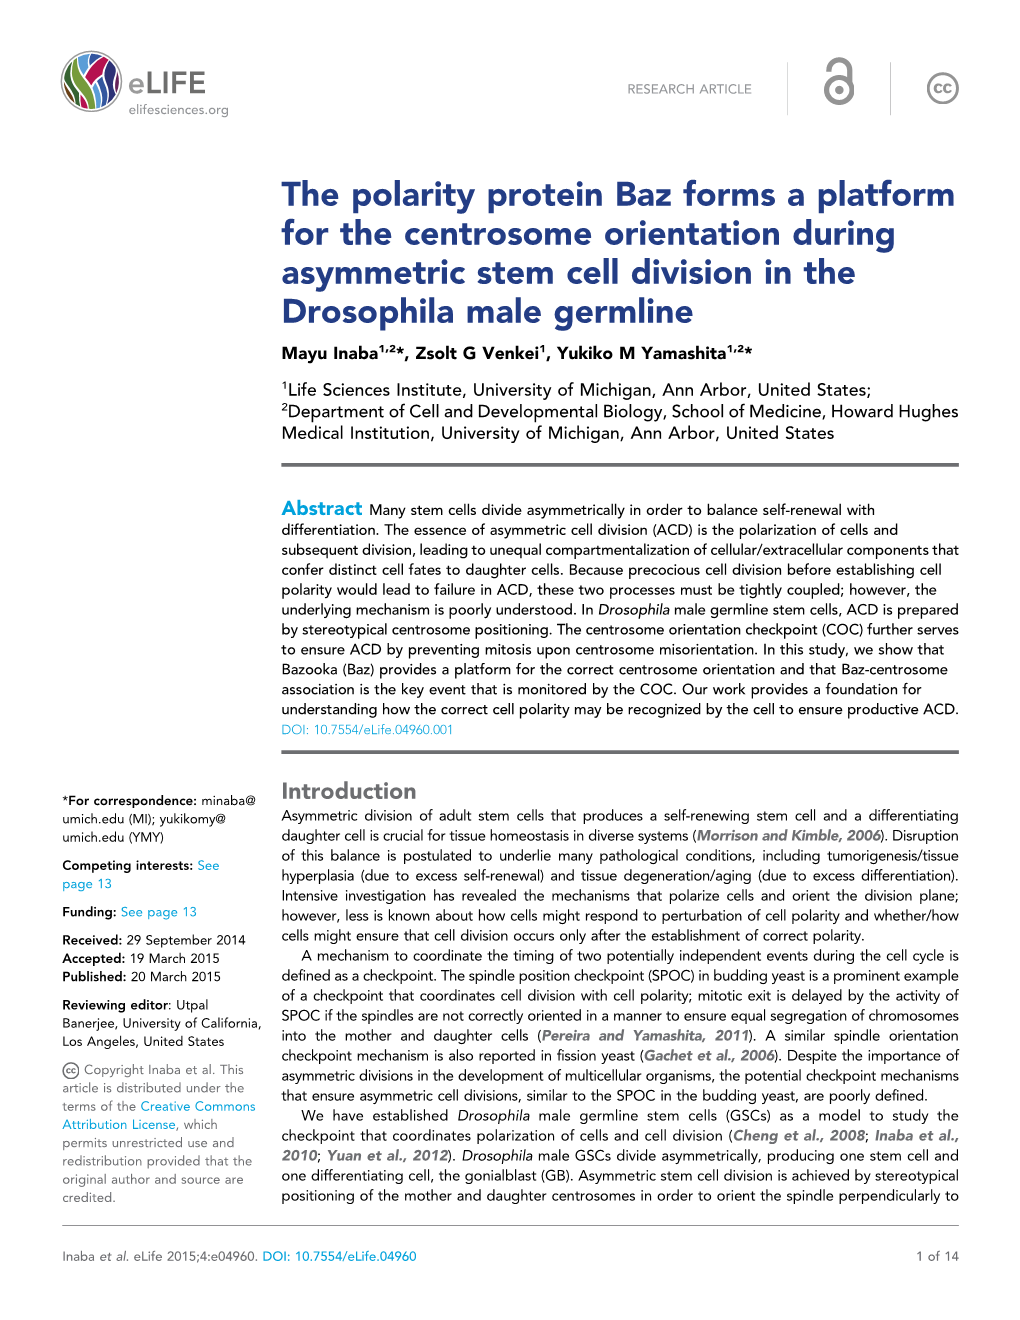 The Polarity Protein Baz Forms a Platform for the Centrosome